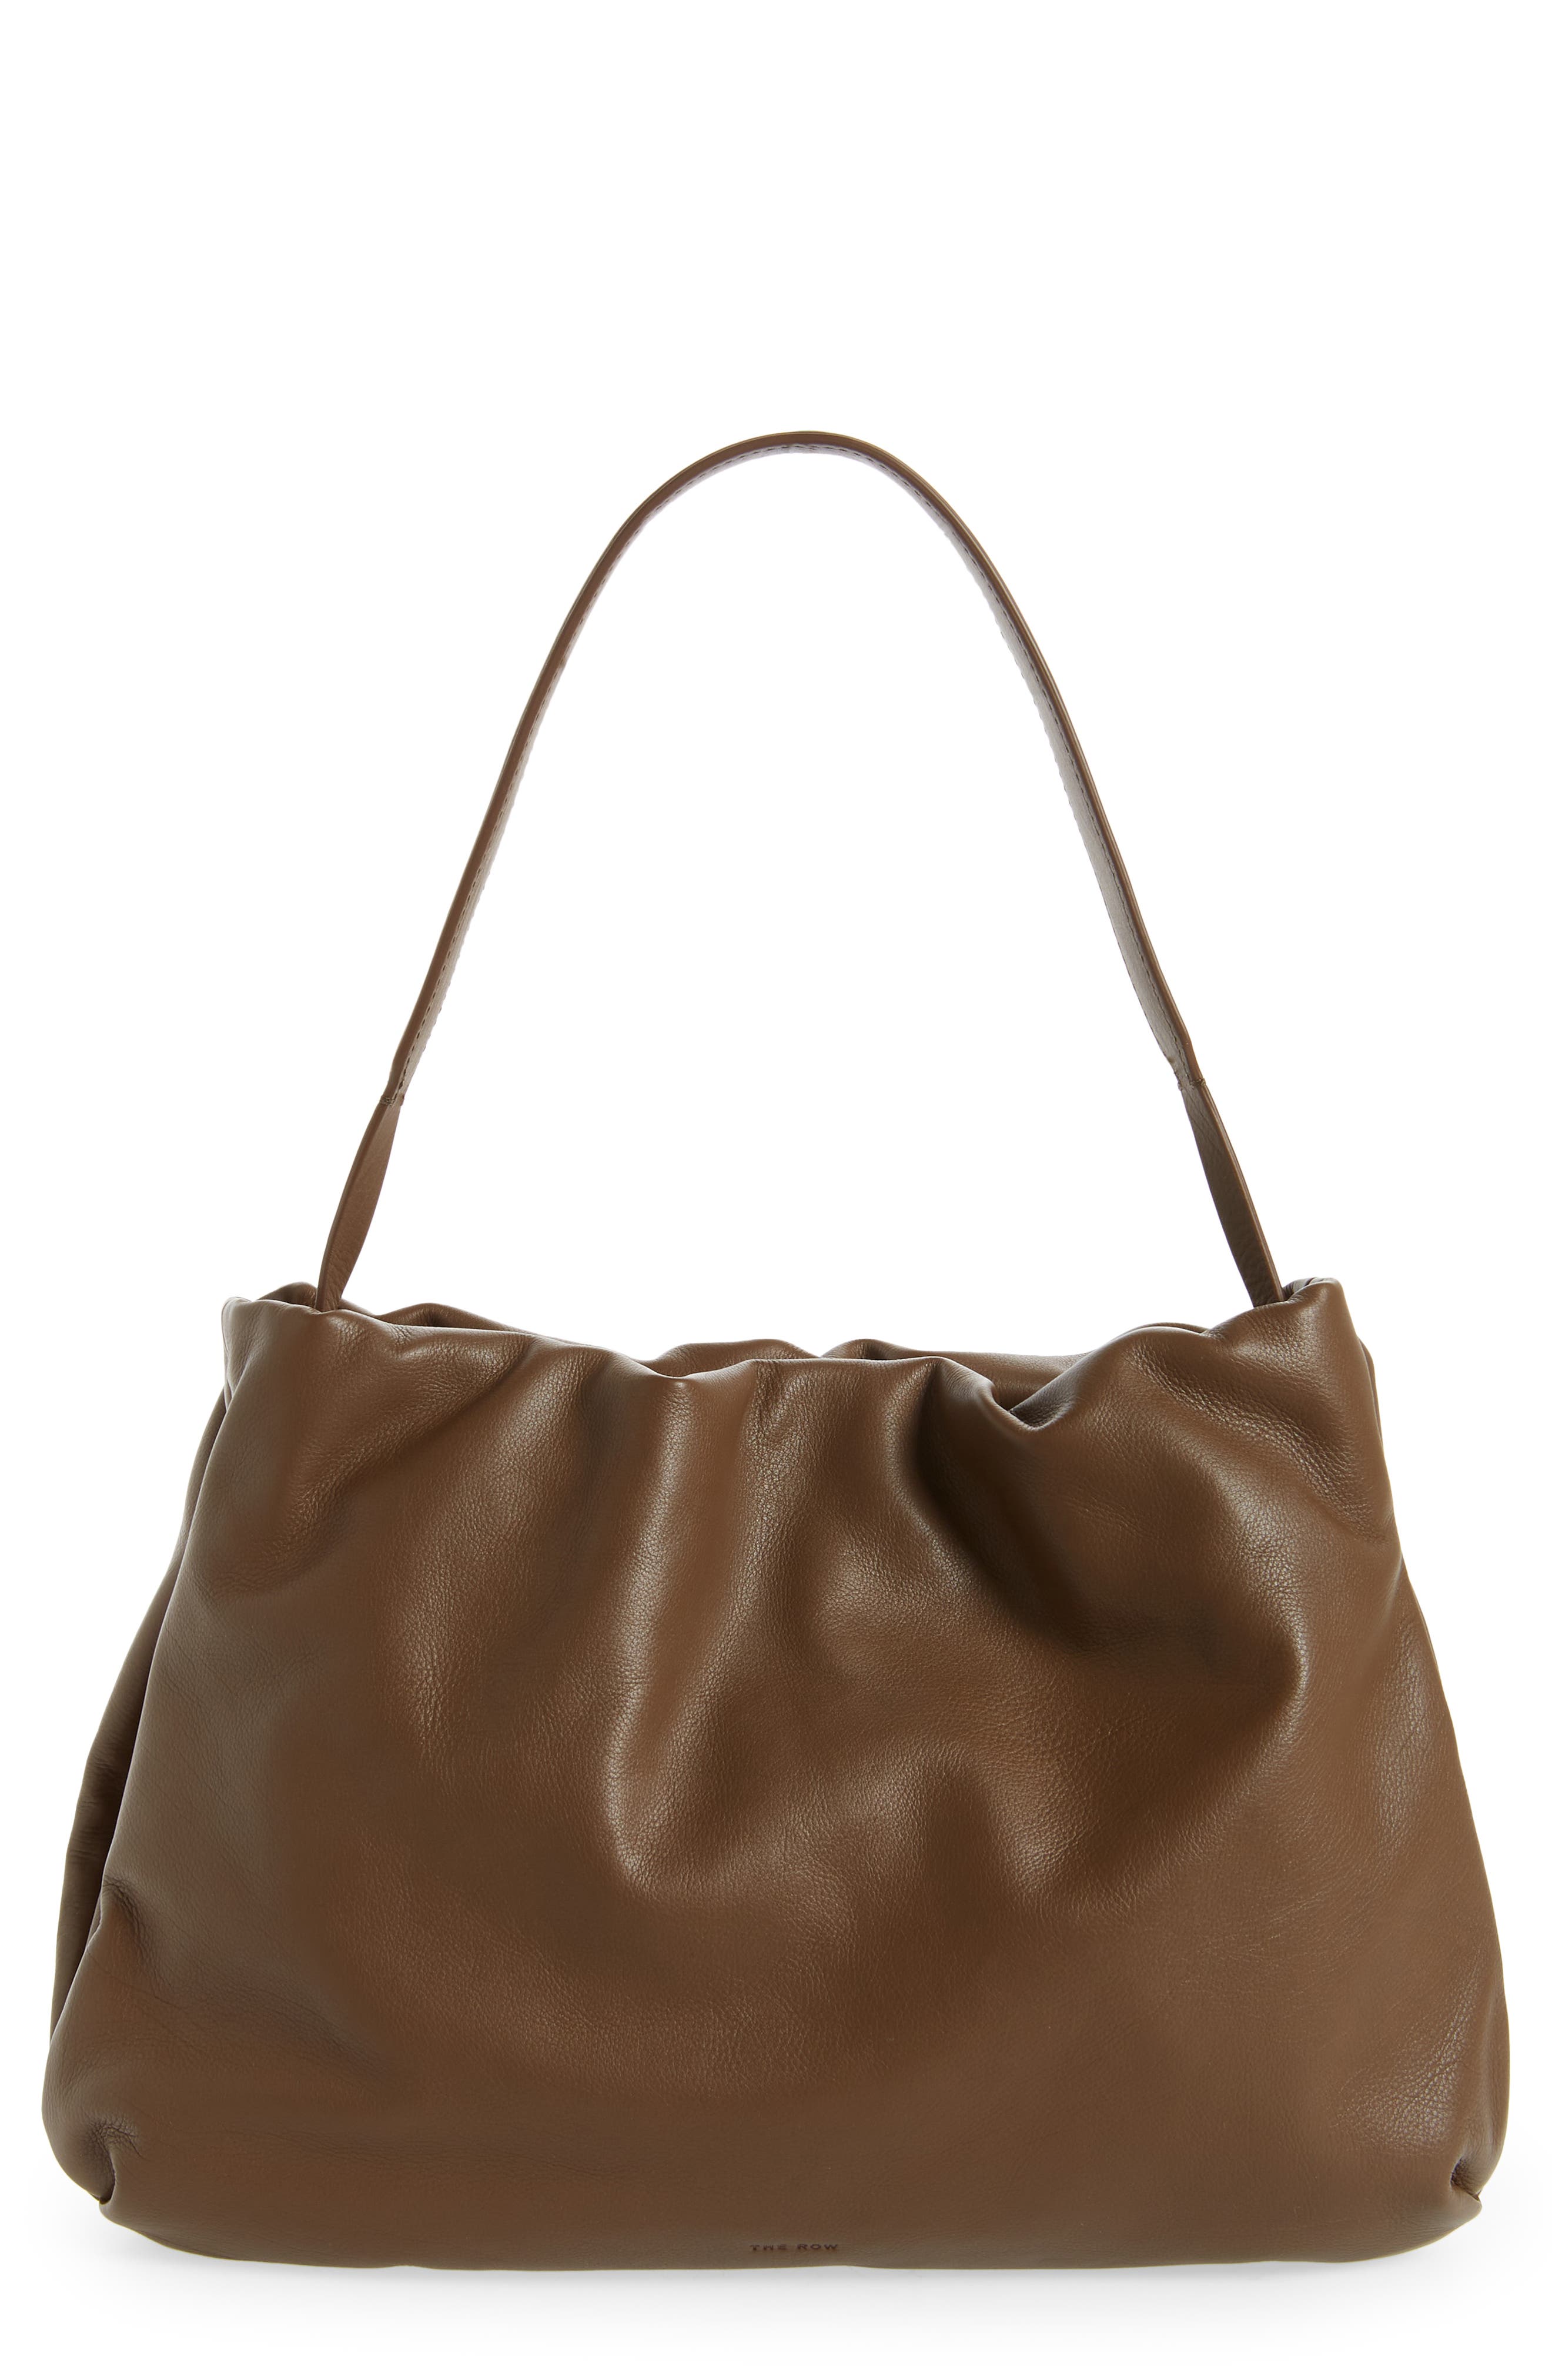 The Row - Bowling Bag Two in Leather - Sepia - One Size